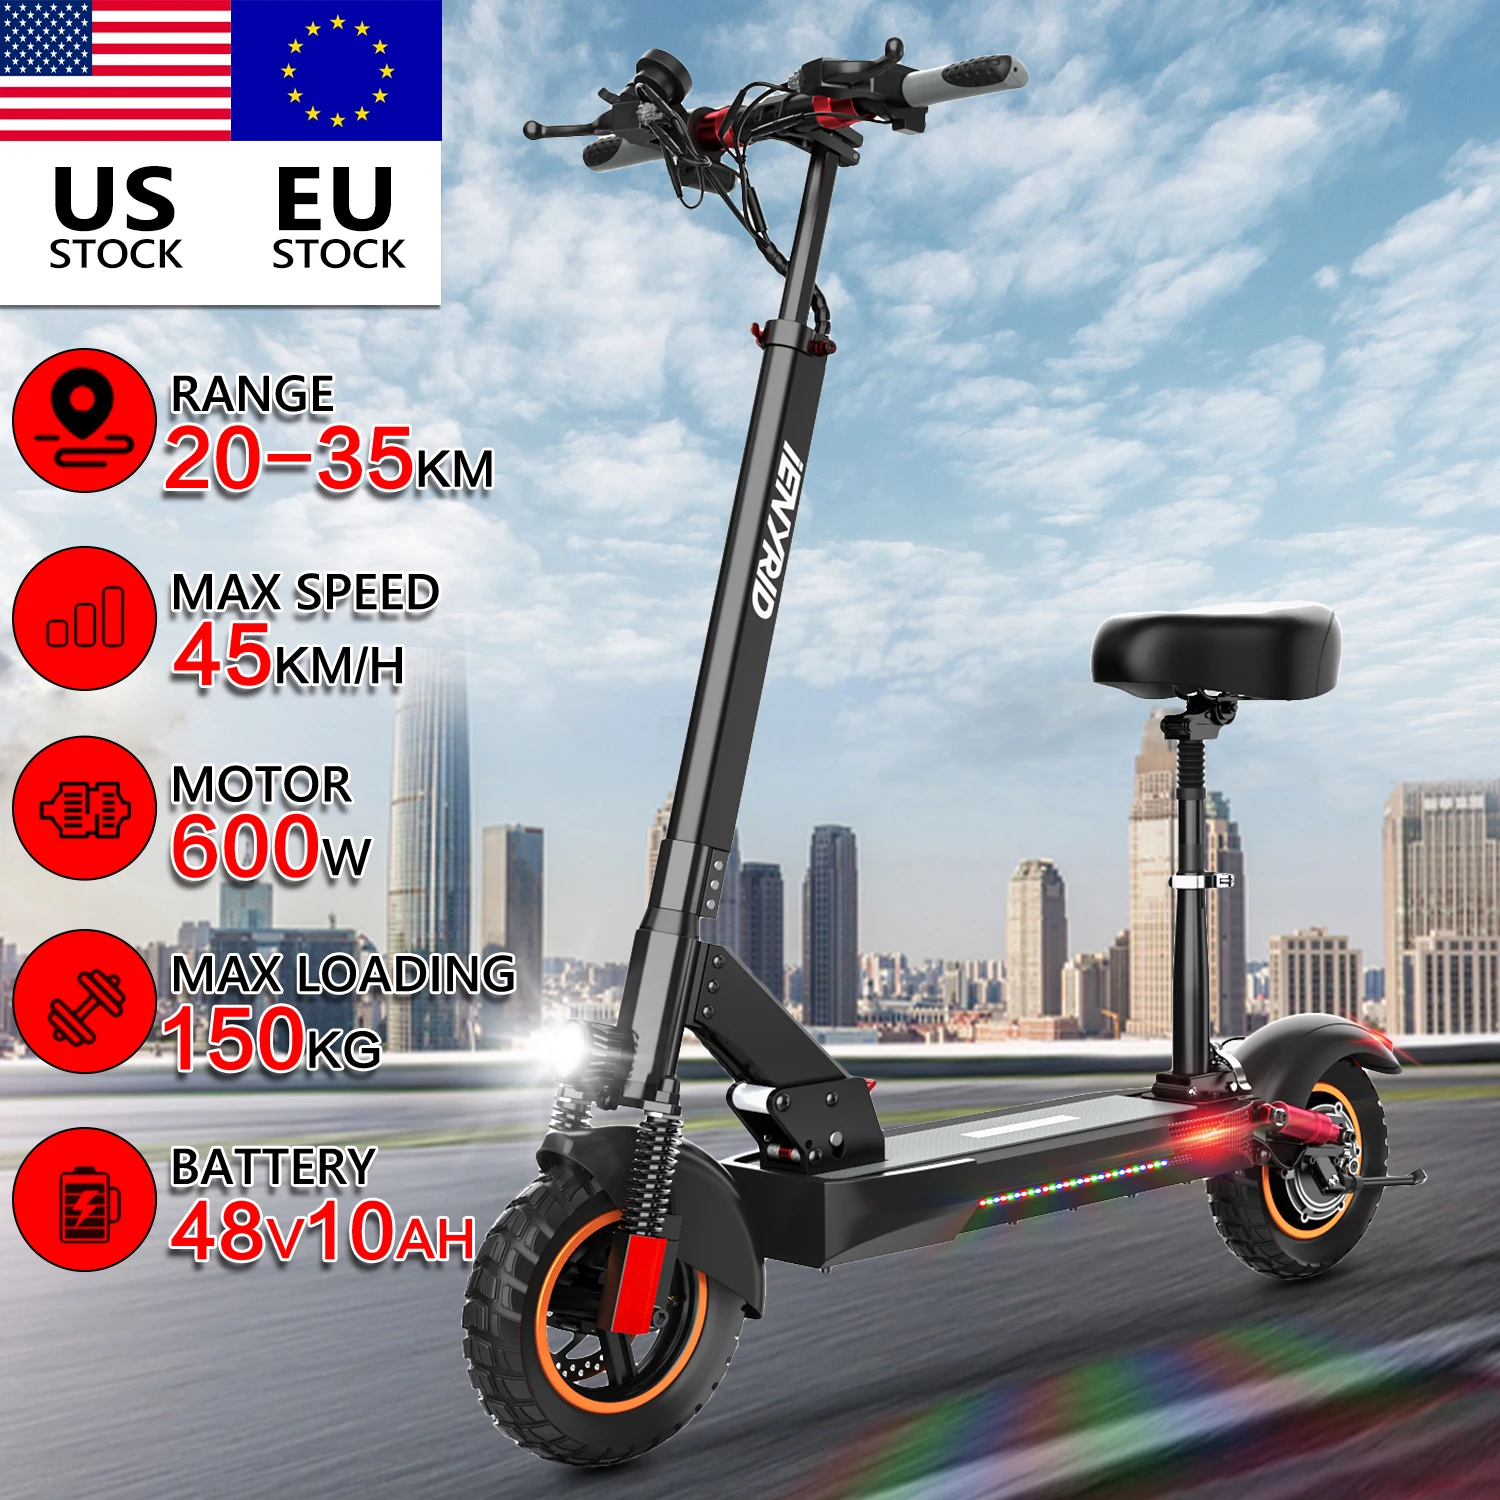 

iENYRID M4 PRO 16ah 500W 10ah 600w Motor LCD Display 3 Speed Modes 45km Max Speed kugoo Electric Scooter for Adult